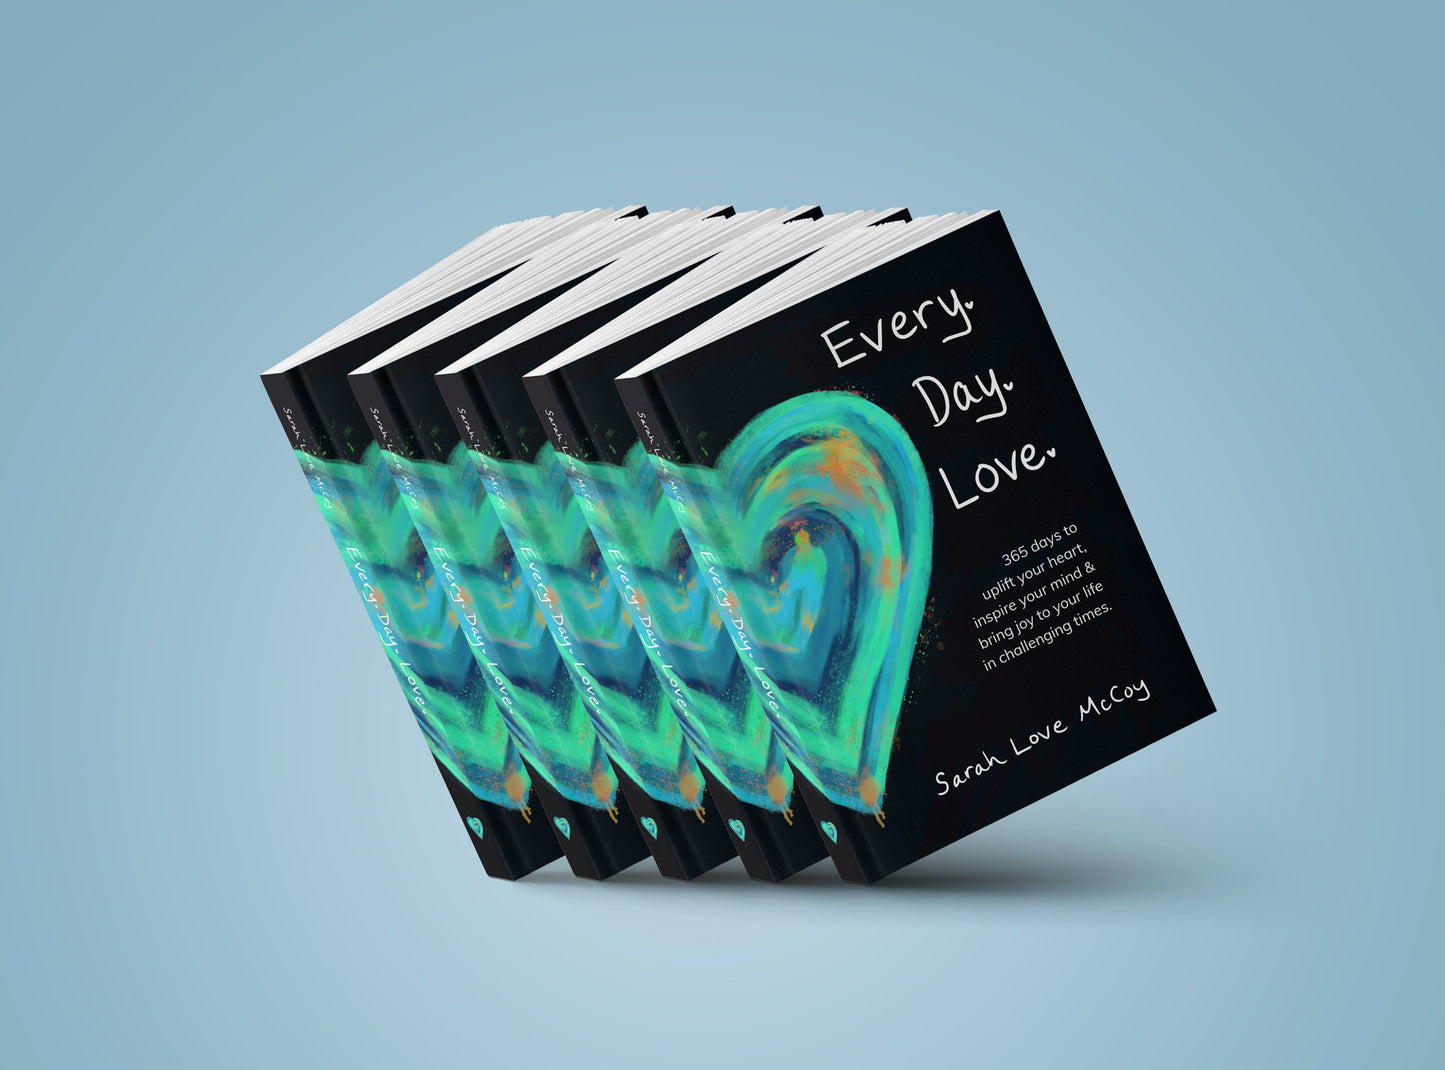 Every. Day. Love. The Book 5 PACK